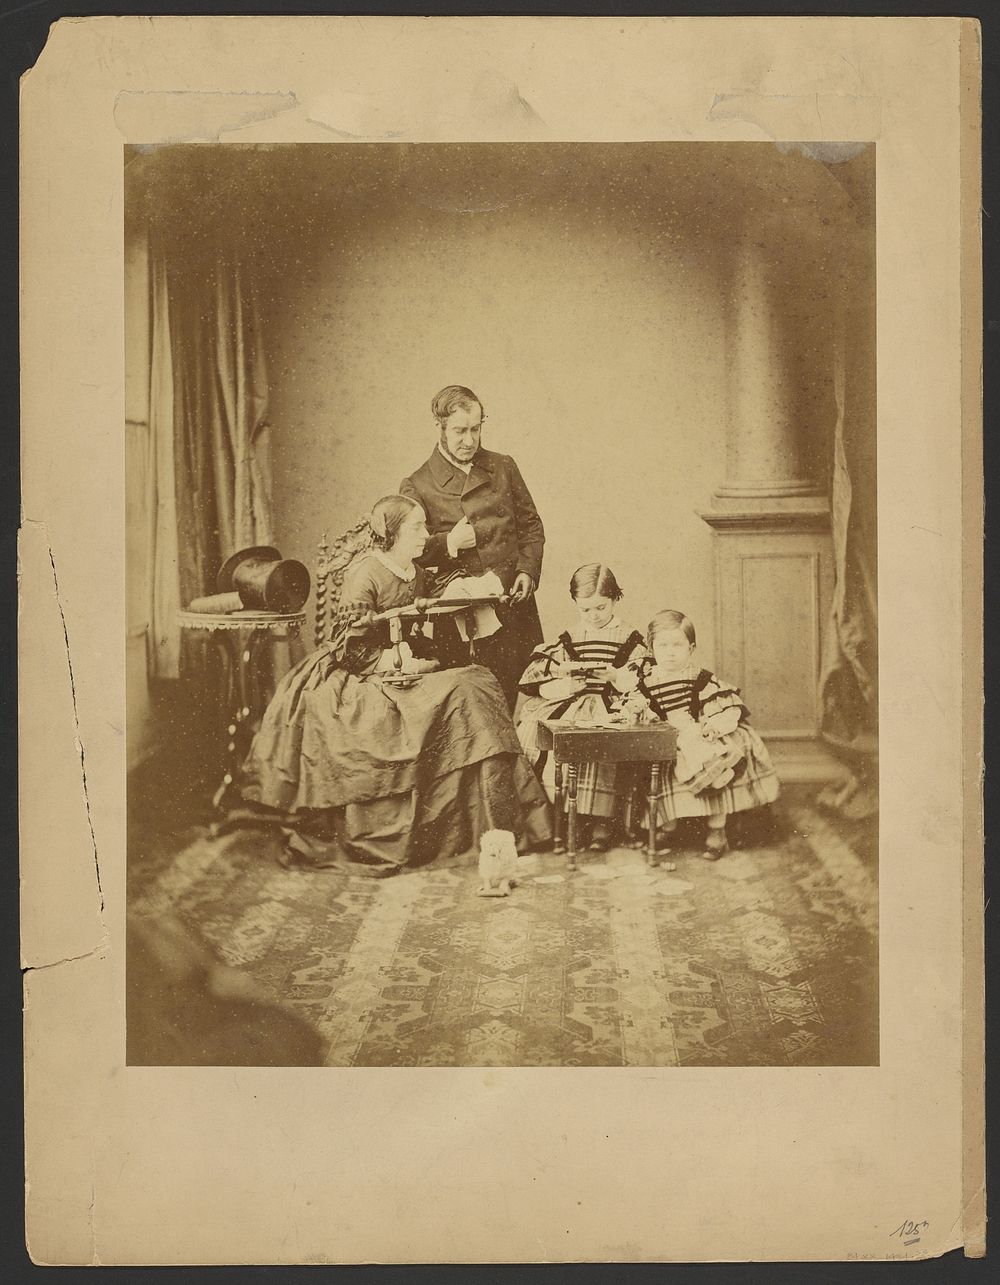 Portrait of man, woman, and children